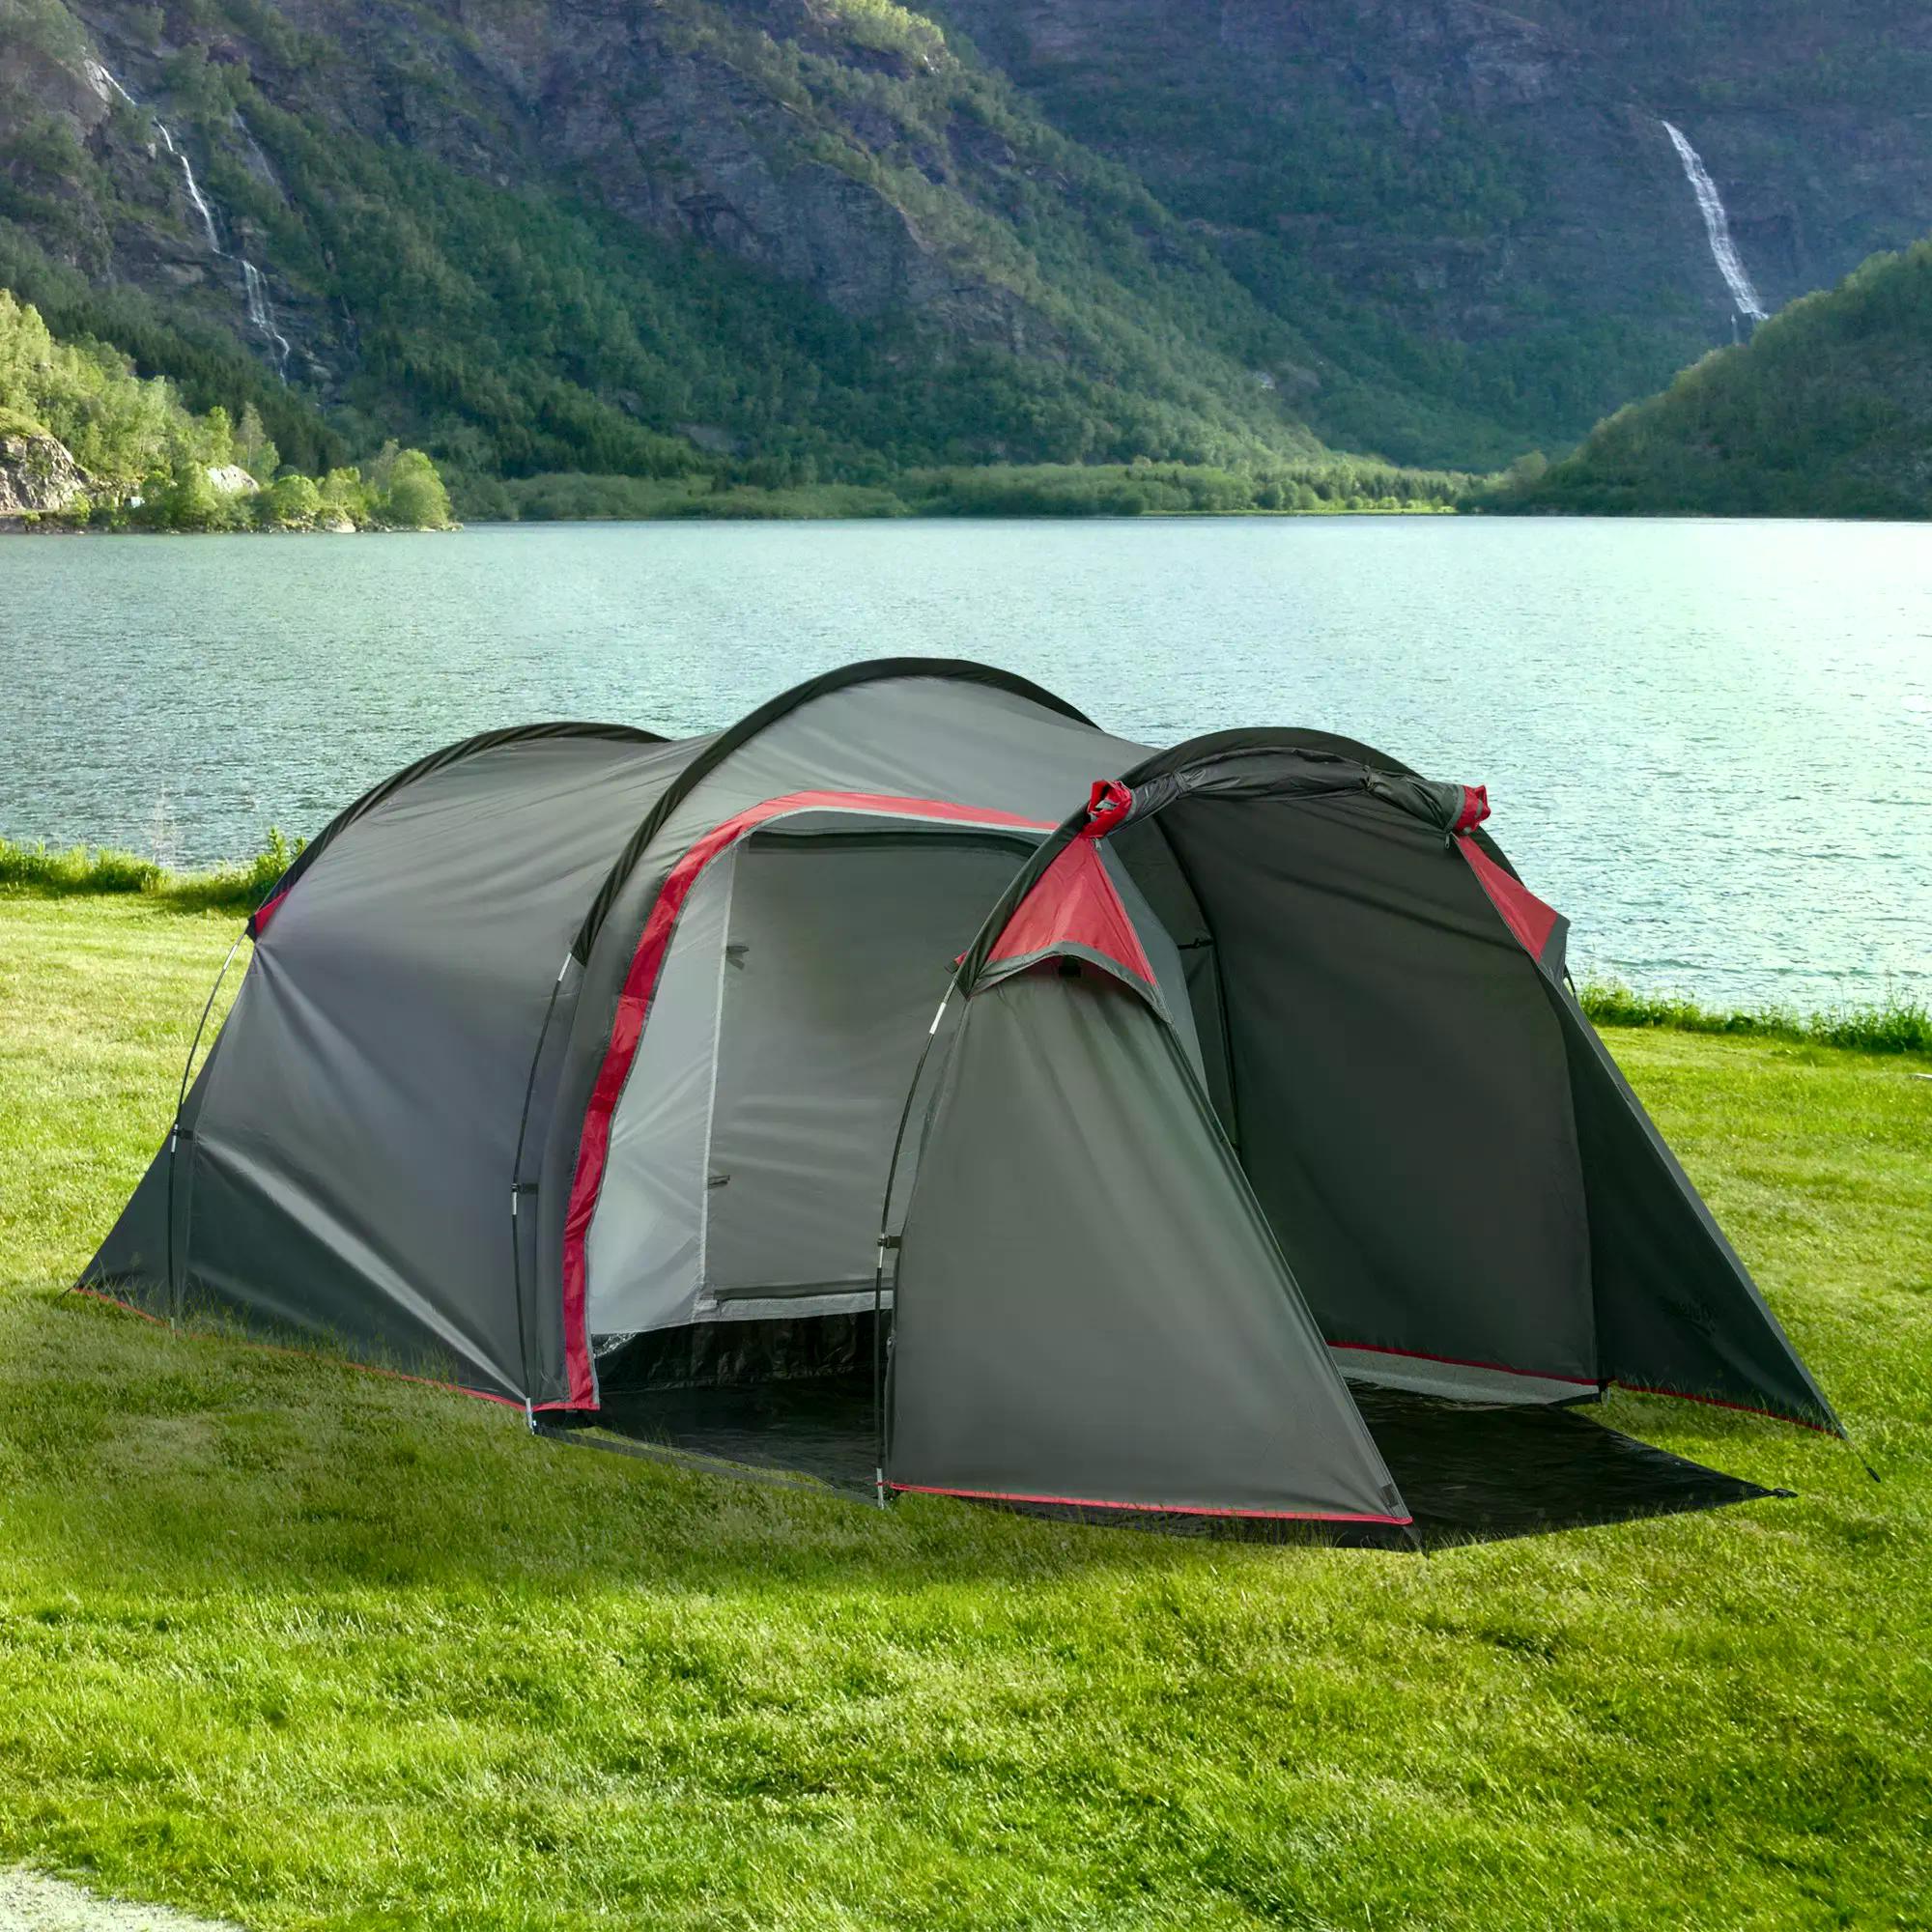 Camping Dome Tent 2 Room for 3-4 Person with Weatherproof Screen Room Vestibule Backpacking Tent Lightweight for Fishing & Hiking Dark Grey-0